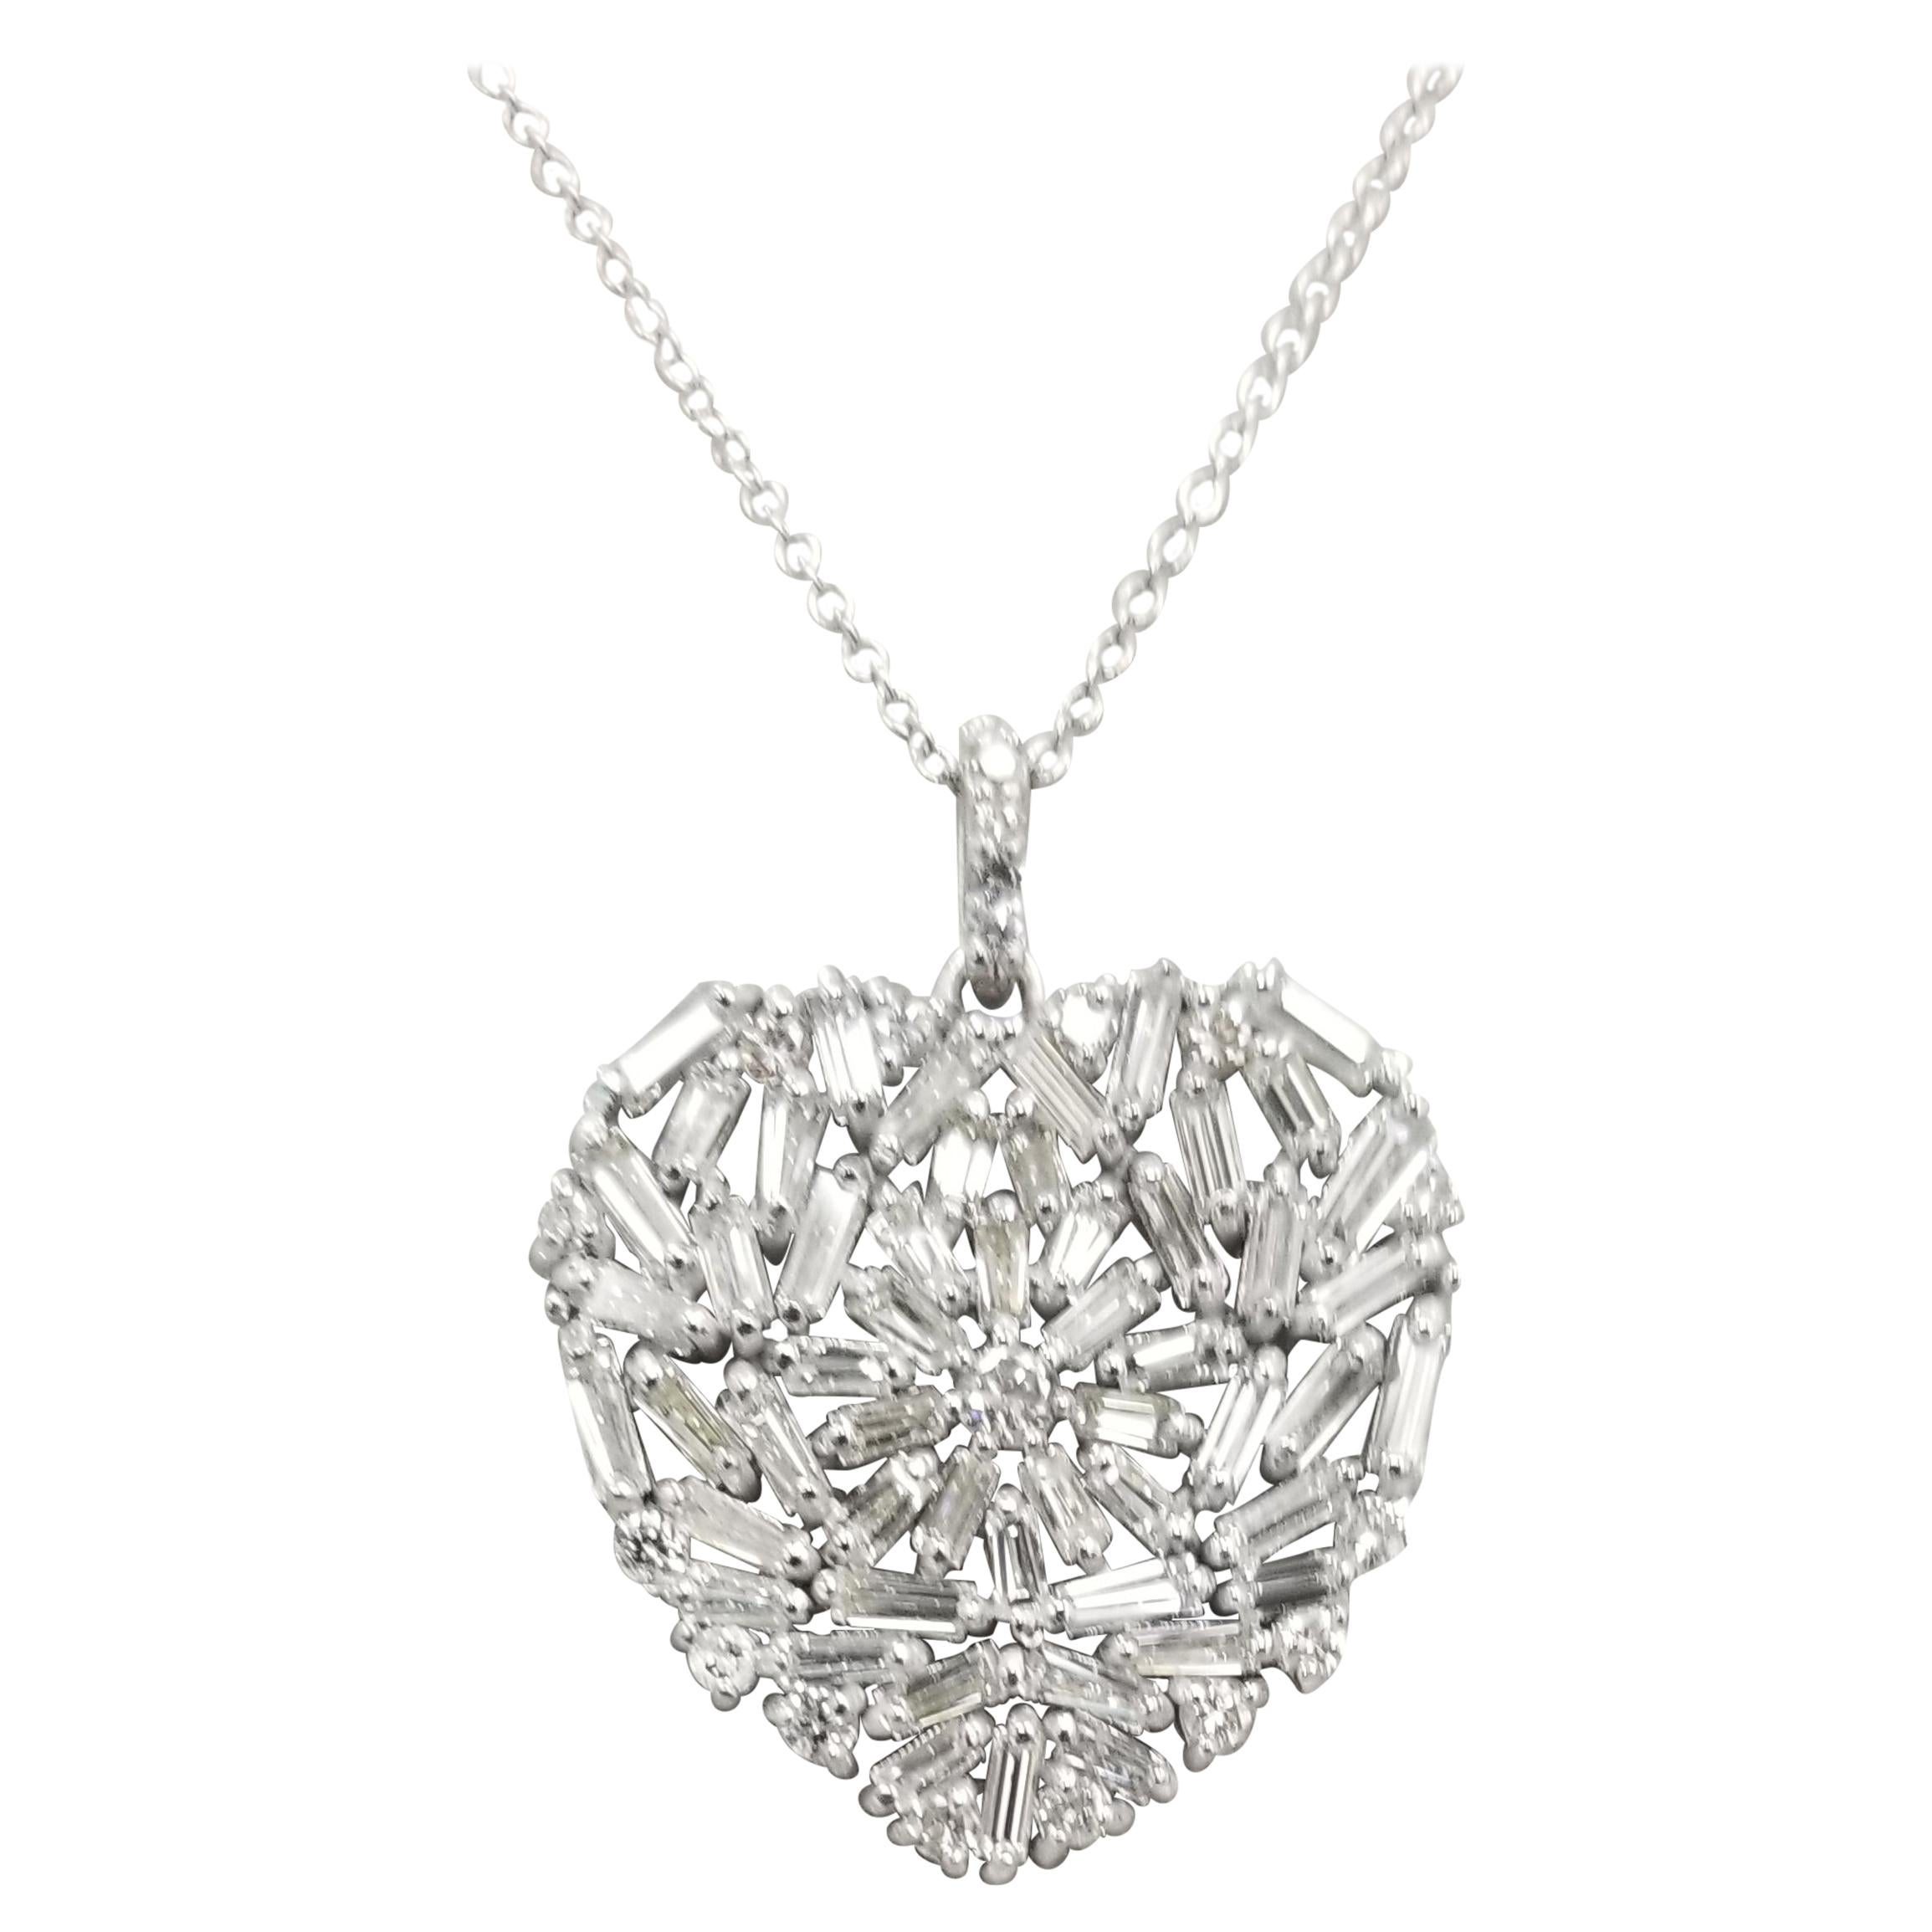 Baguette cut diamond heart set in 14k white gold total weight 2.81cts.